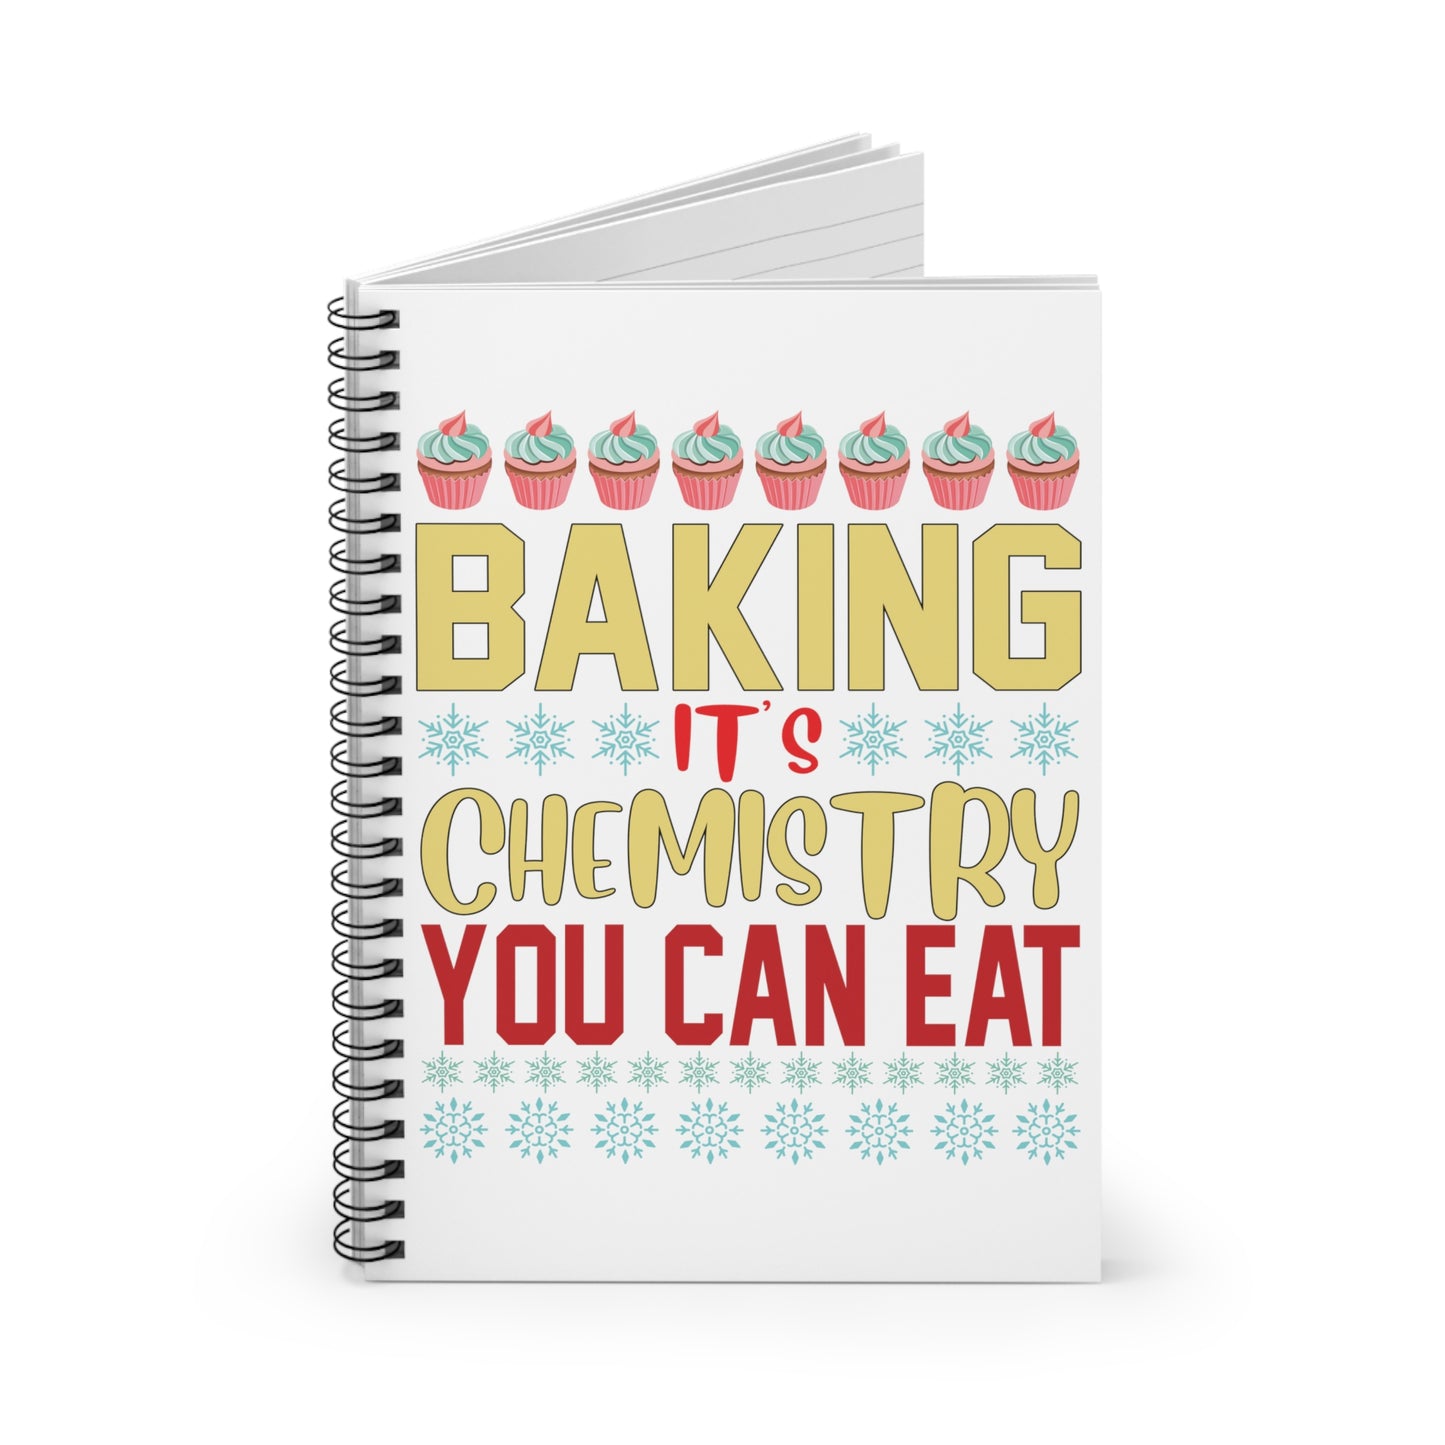 Baking - Chemistry You Can Eat: Spiral Notebook - Log Books - Journals - Diaries - and More Custom Printed by TheGlassyLass